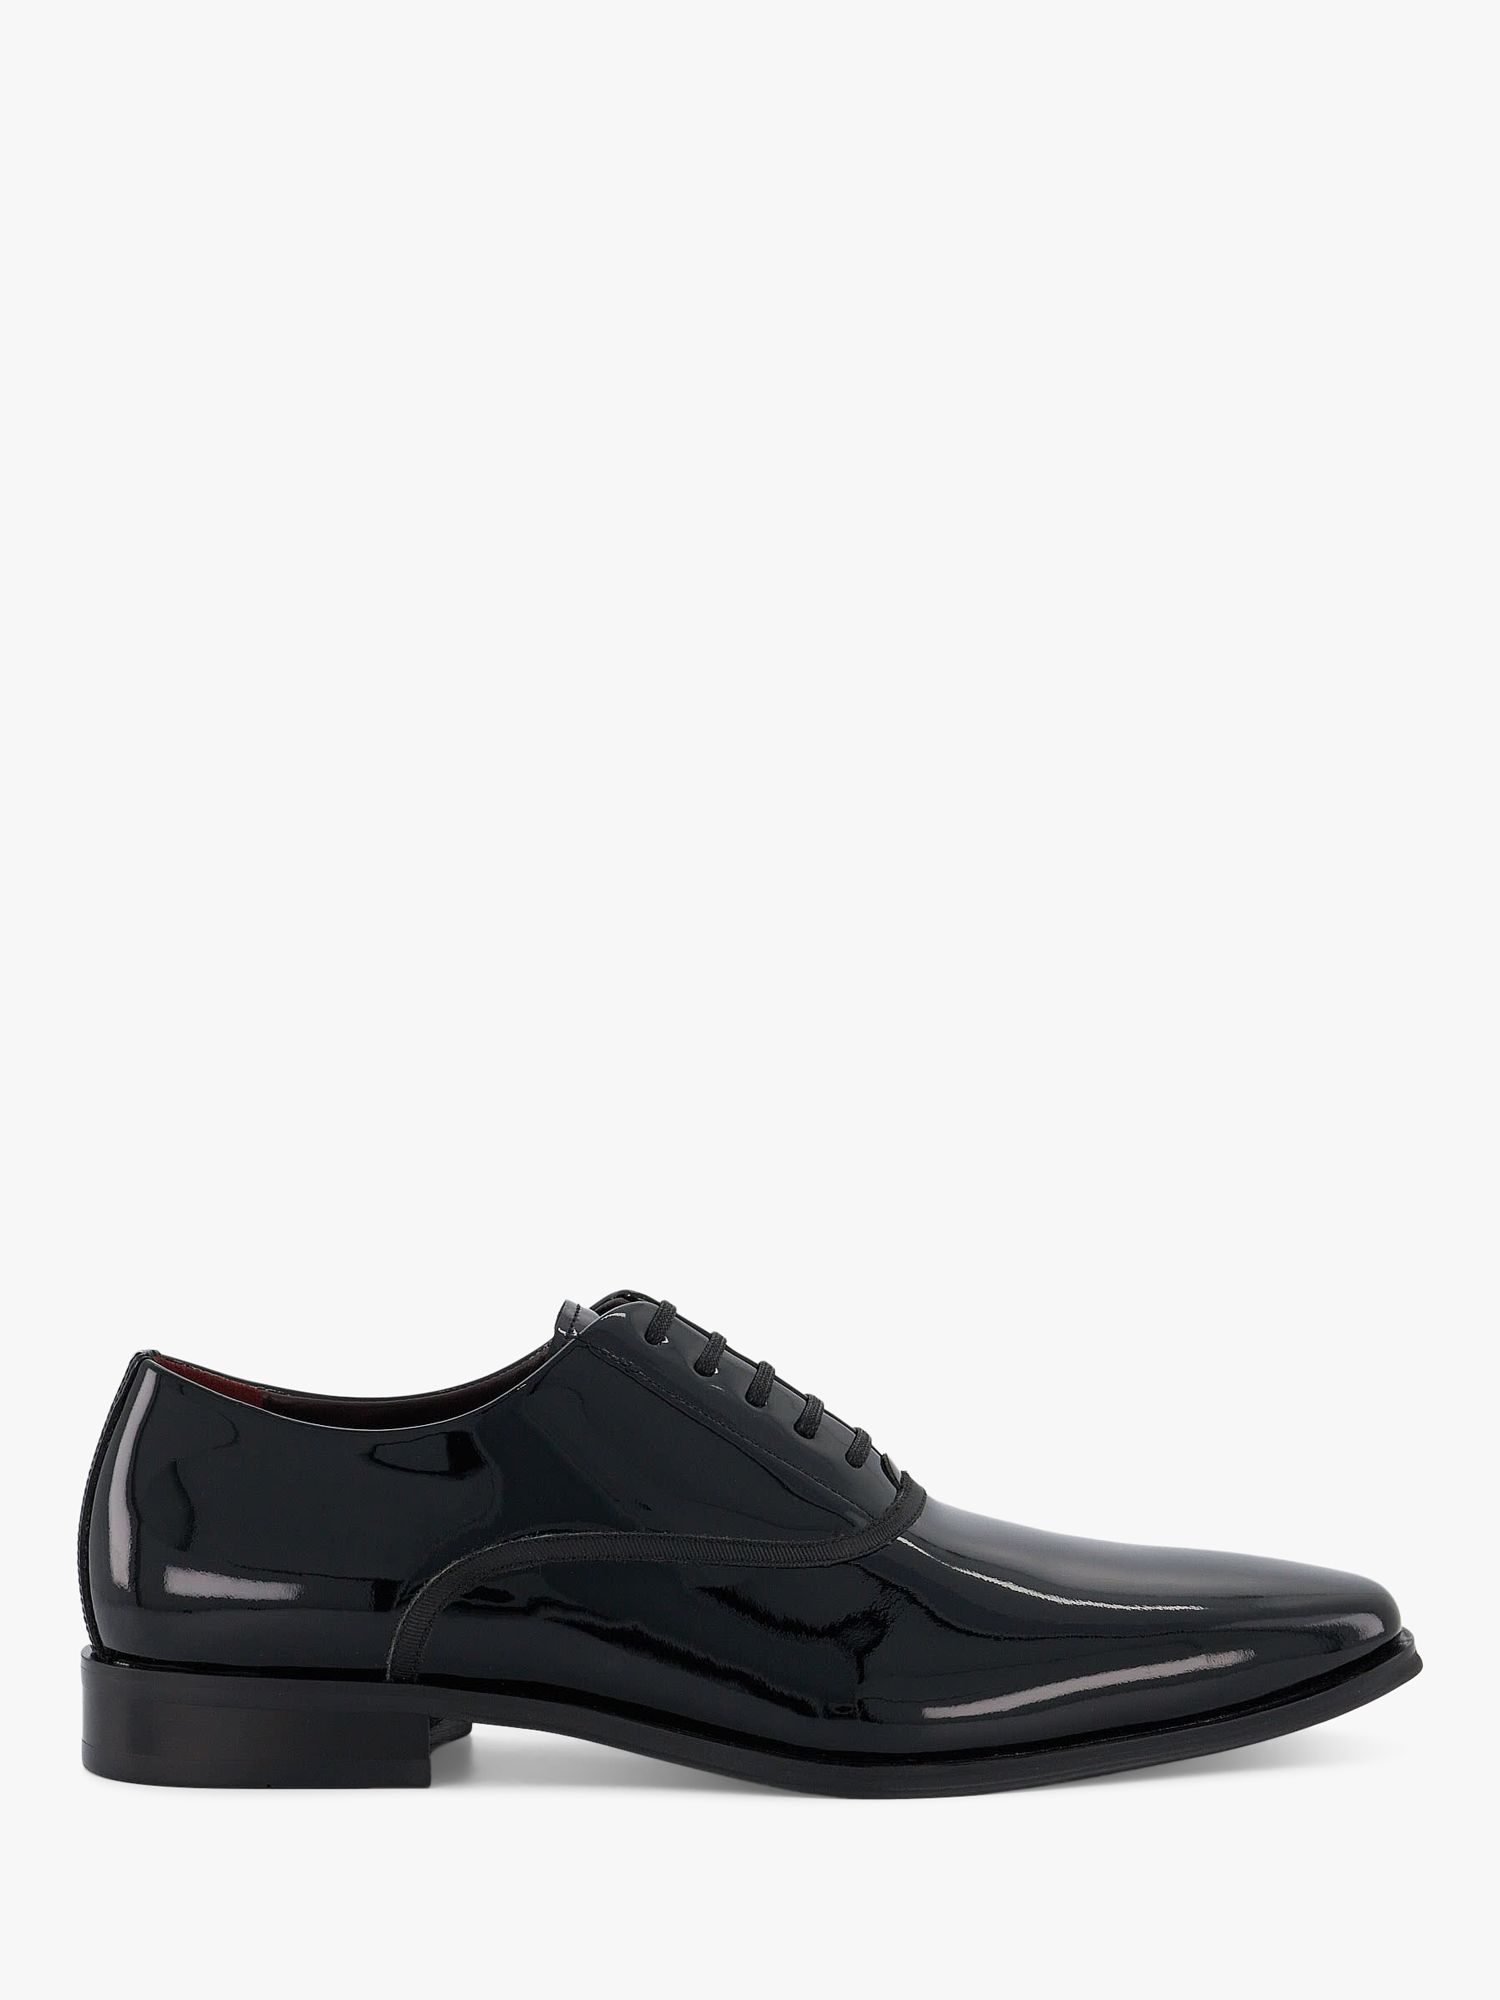 Dune Swallow Patent Leather Oxford Shoes, Black, 8